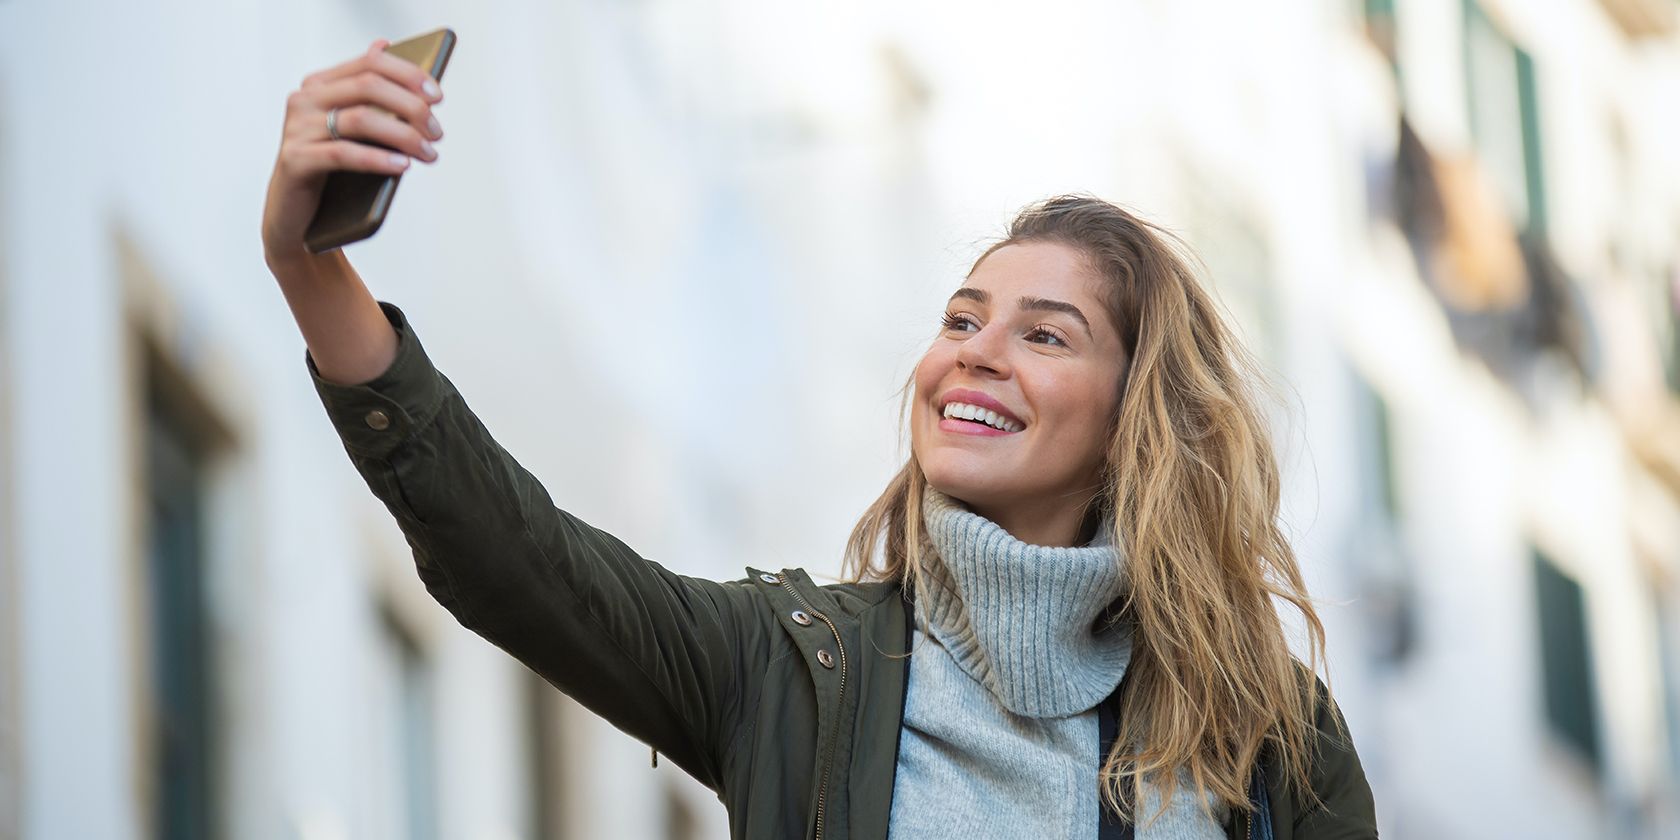 A lady taking a selfie on her smartphone